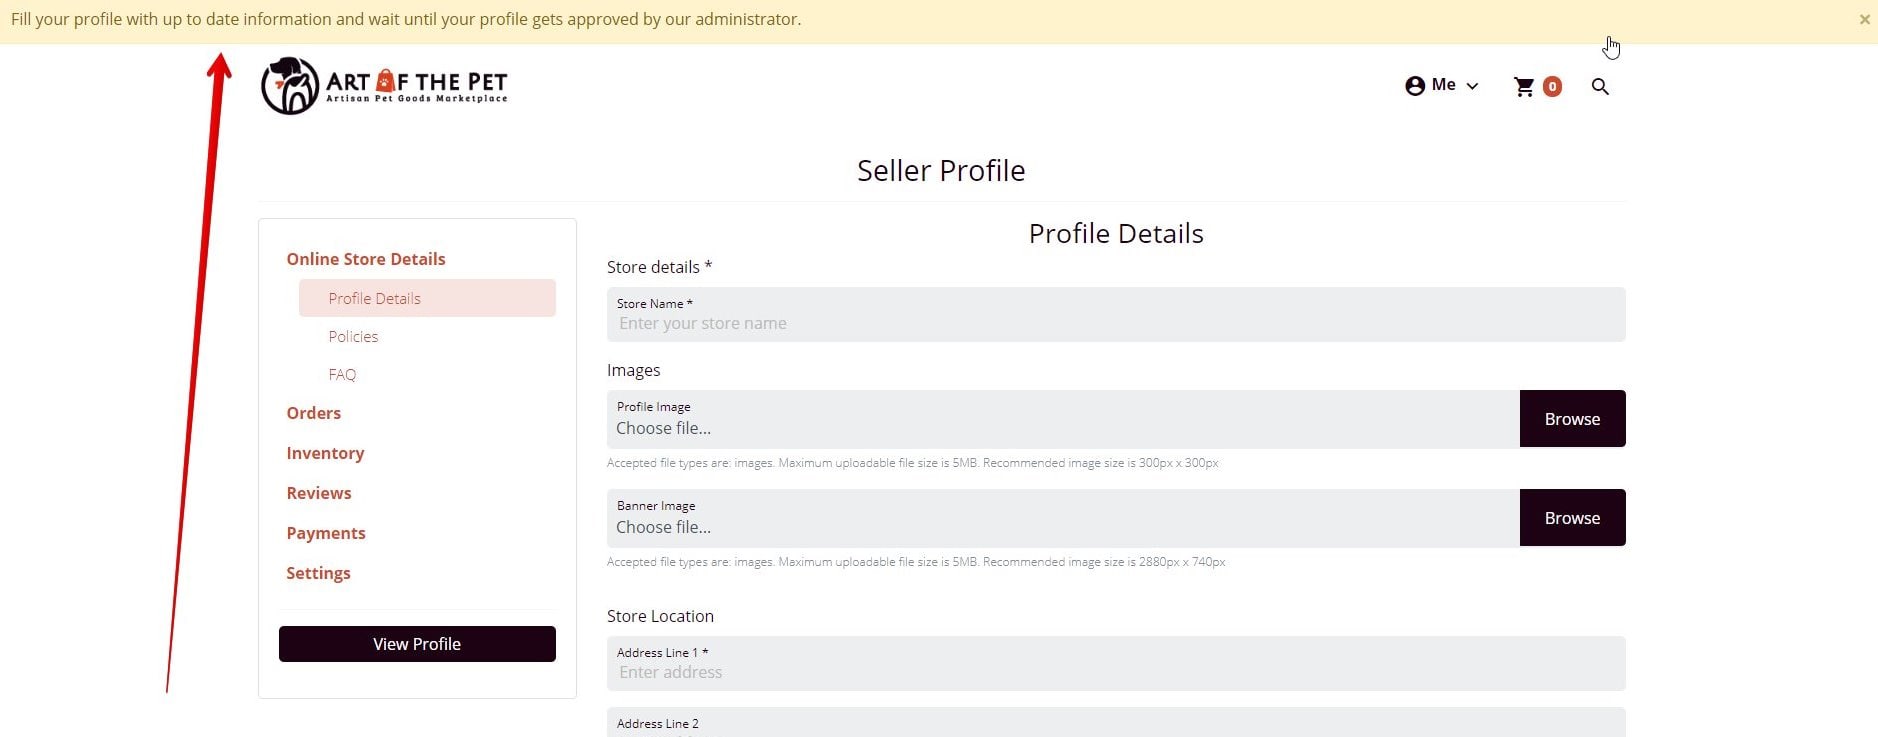 sellers prompted to fill profile while in moderation